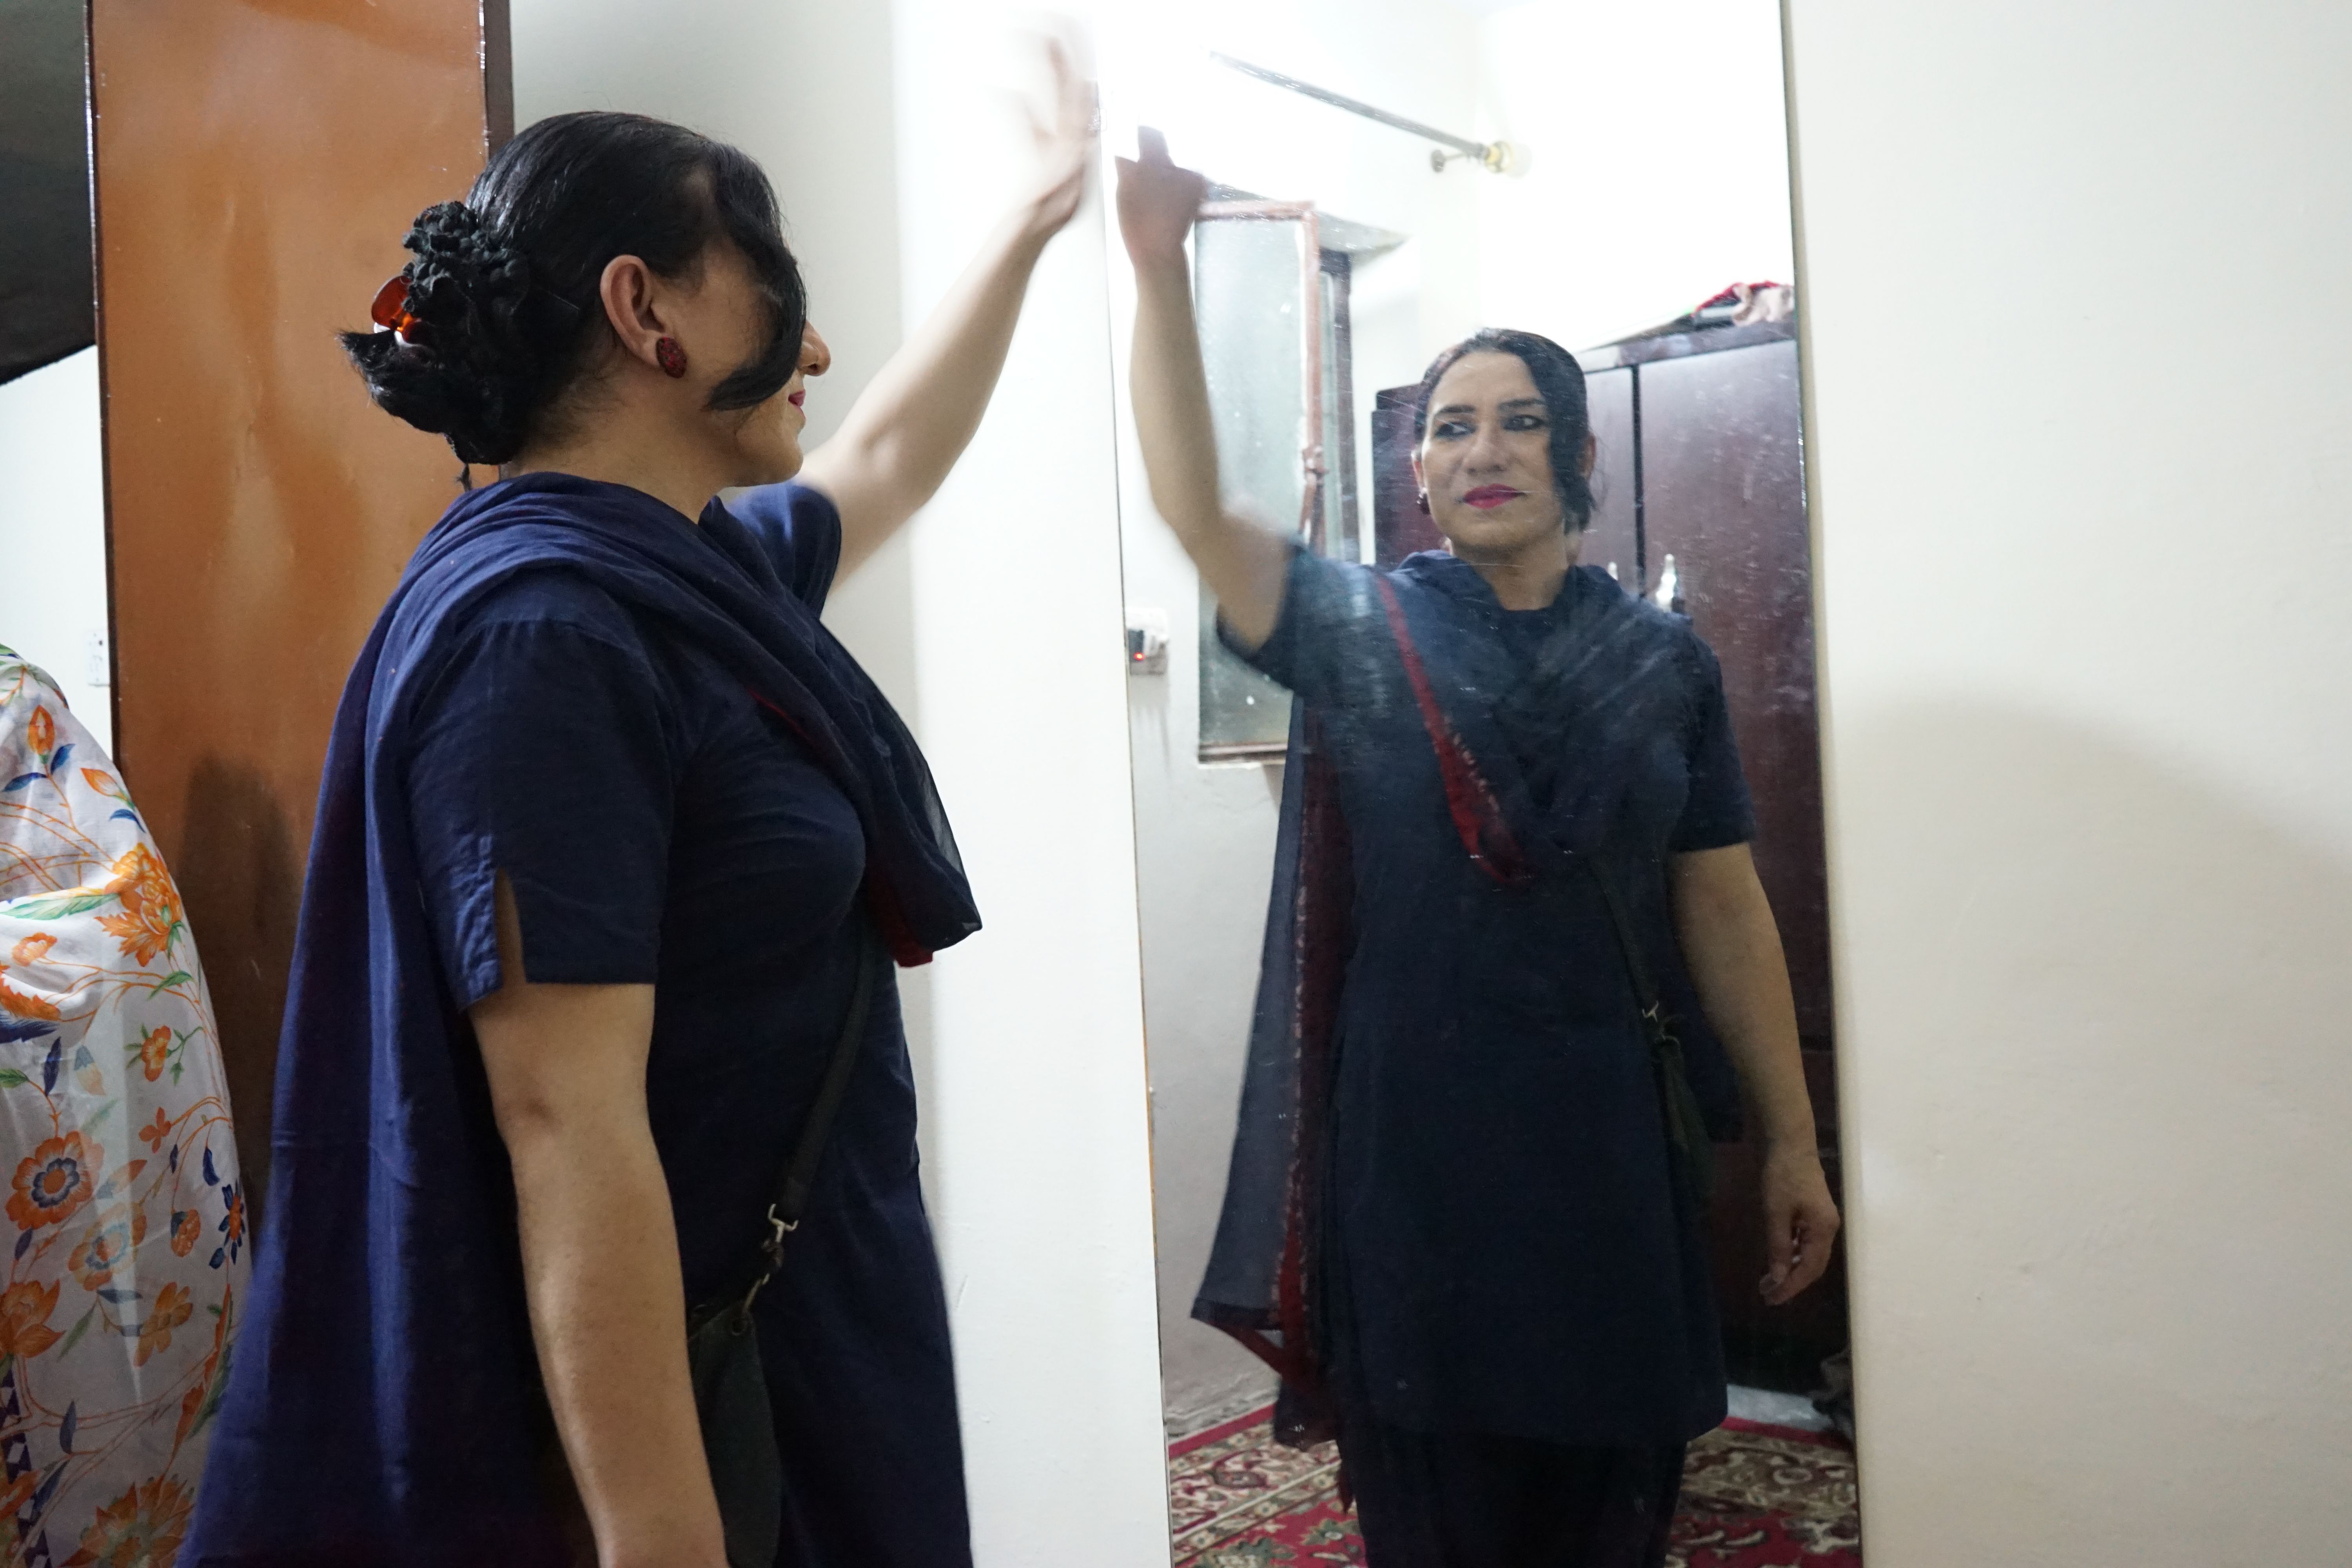 Billi poses in the mirror at Zakiyya's place after opening her fast. She is Zakiyya's beti (or daughter) in the khawaja sira kinship system